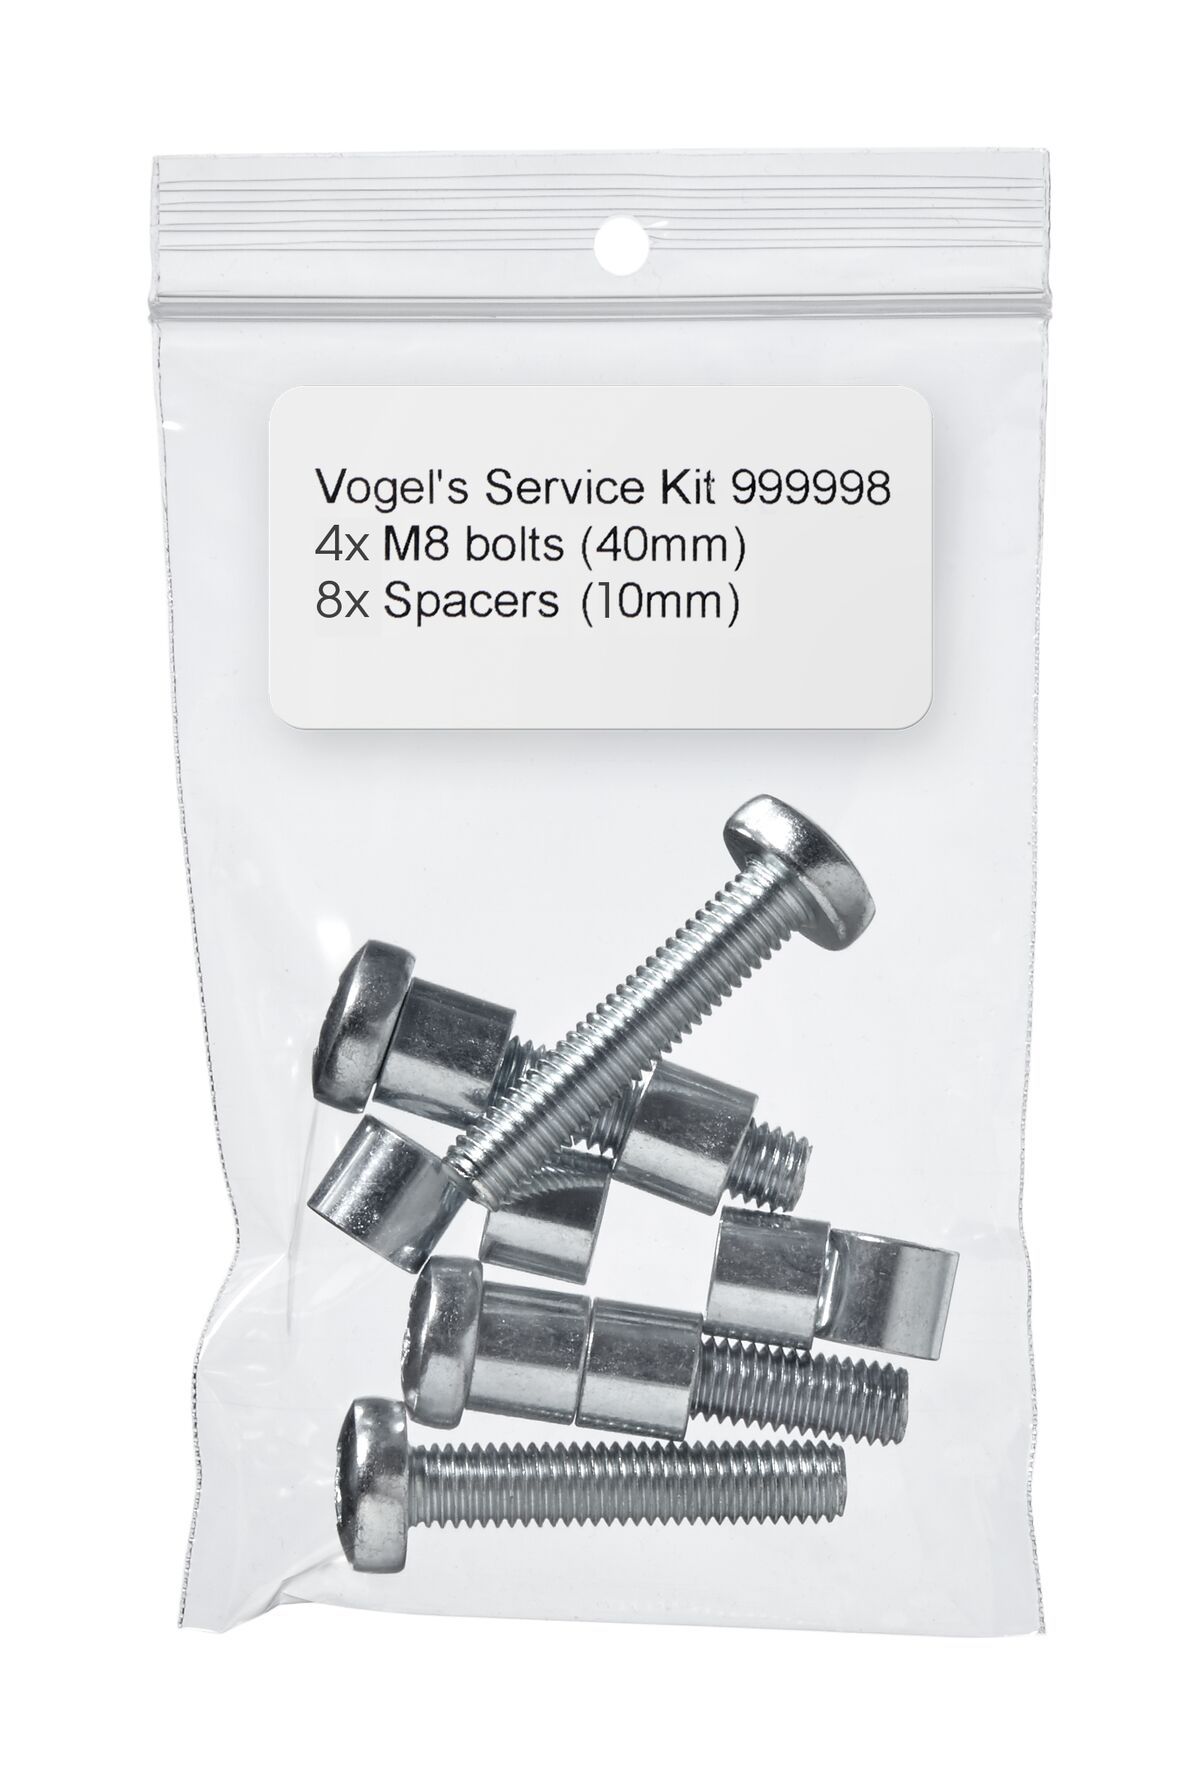 Vogel's Service Kit - Spacers (20 mm), M8 bolts (40 mm) - Product